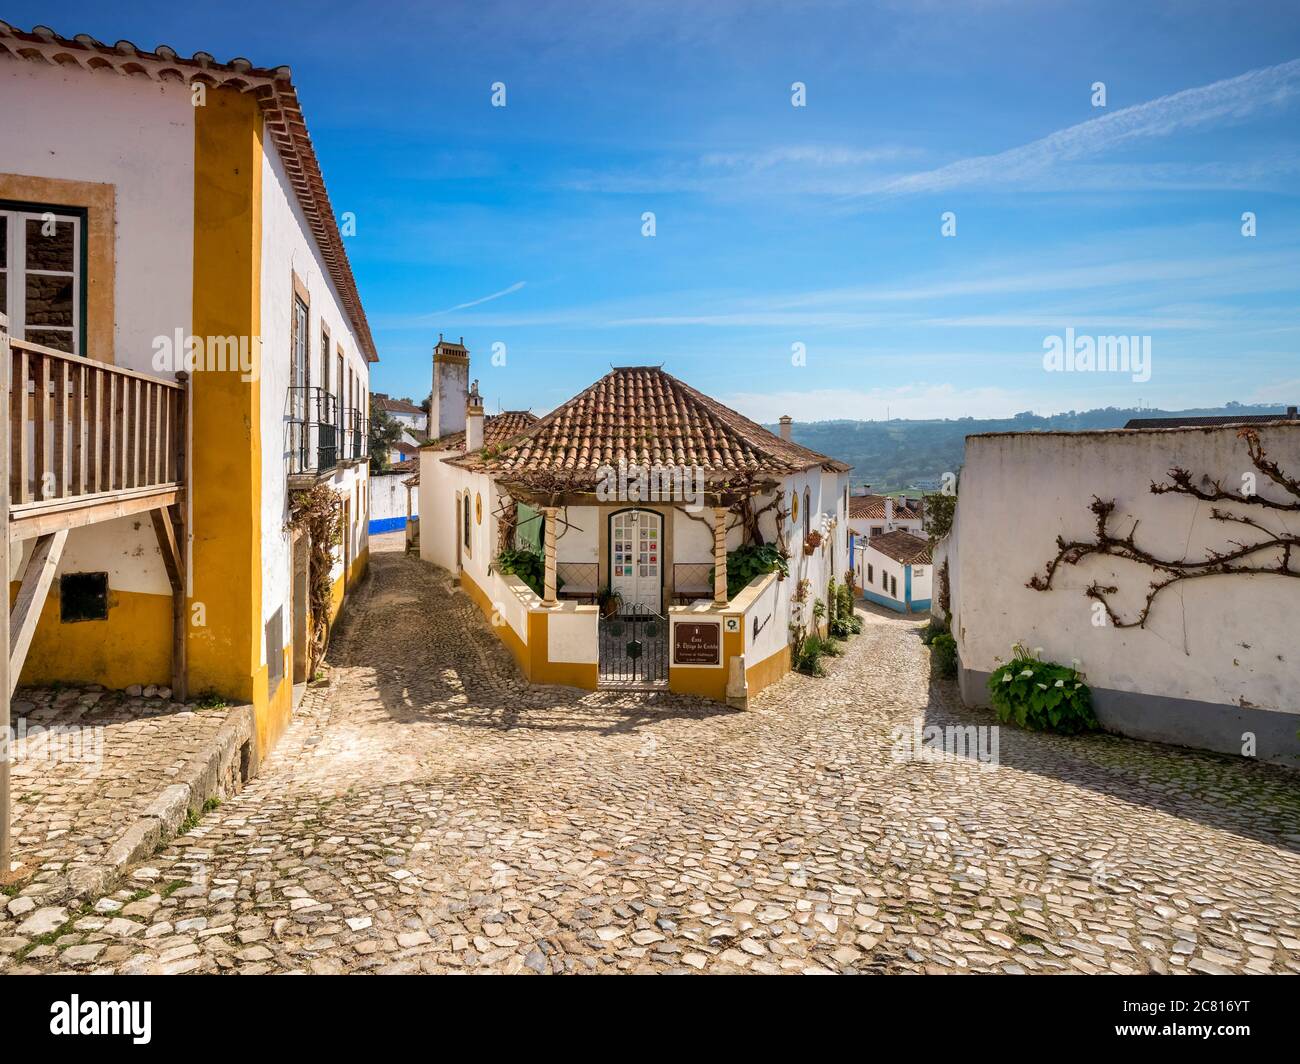 11 March 2020: Obidos, Portugal - Streets and houses in the walled town of Obidos. Stock Photo